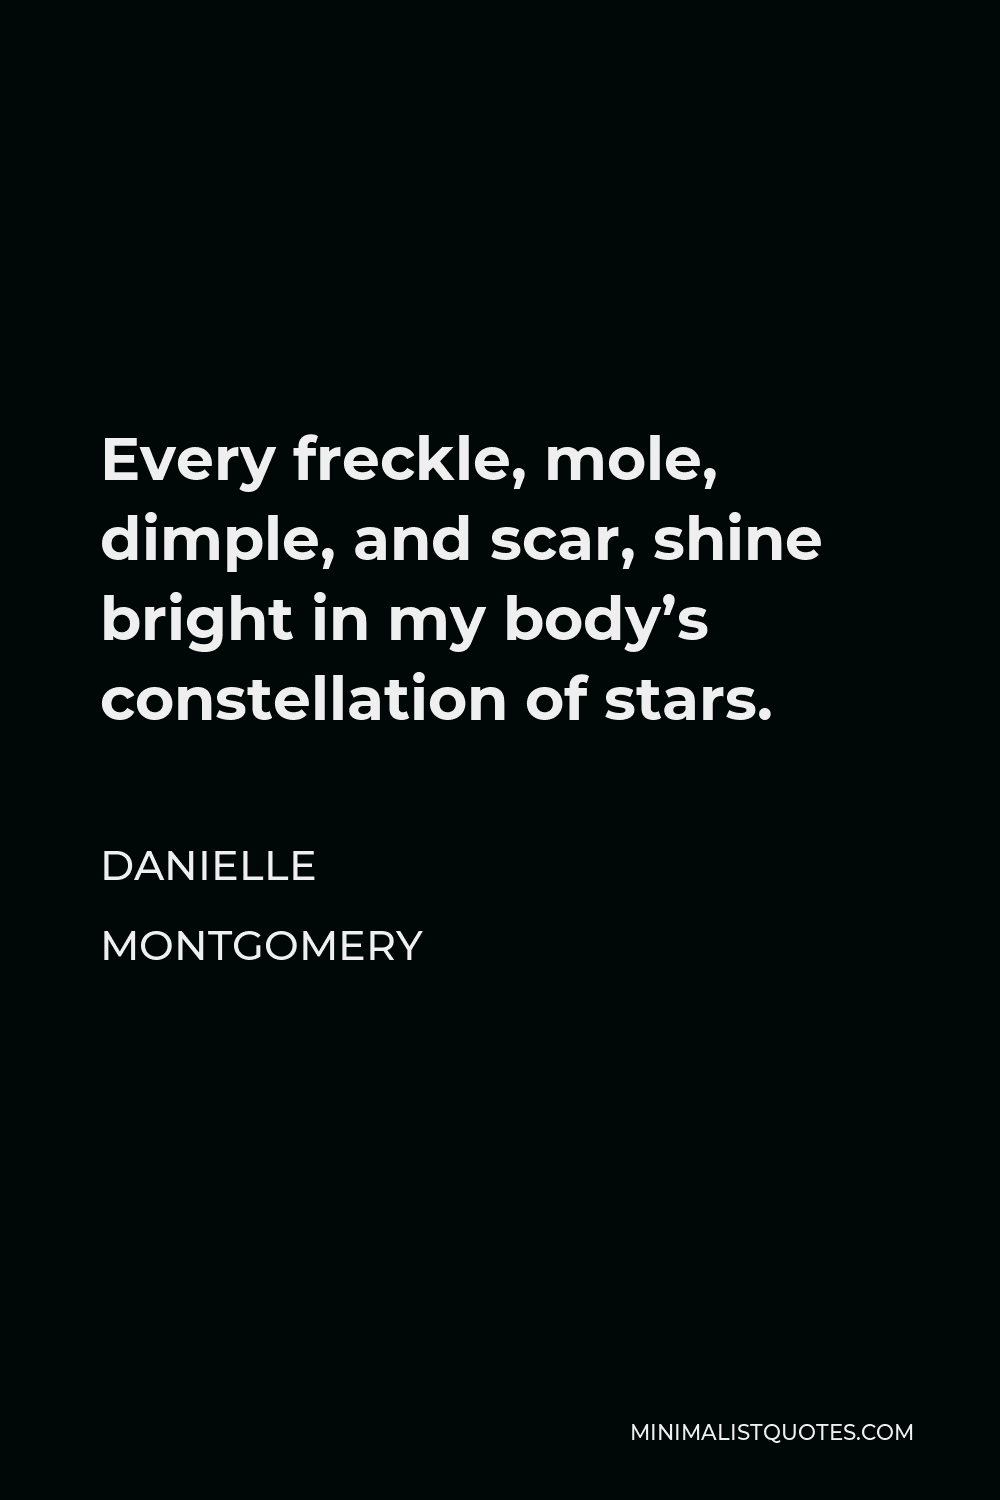 Danielle Montgomery Quote - Every freckle, mole, dimple, and scar, shine bright in my body’s constellation of stars.